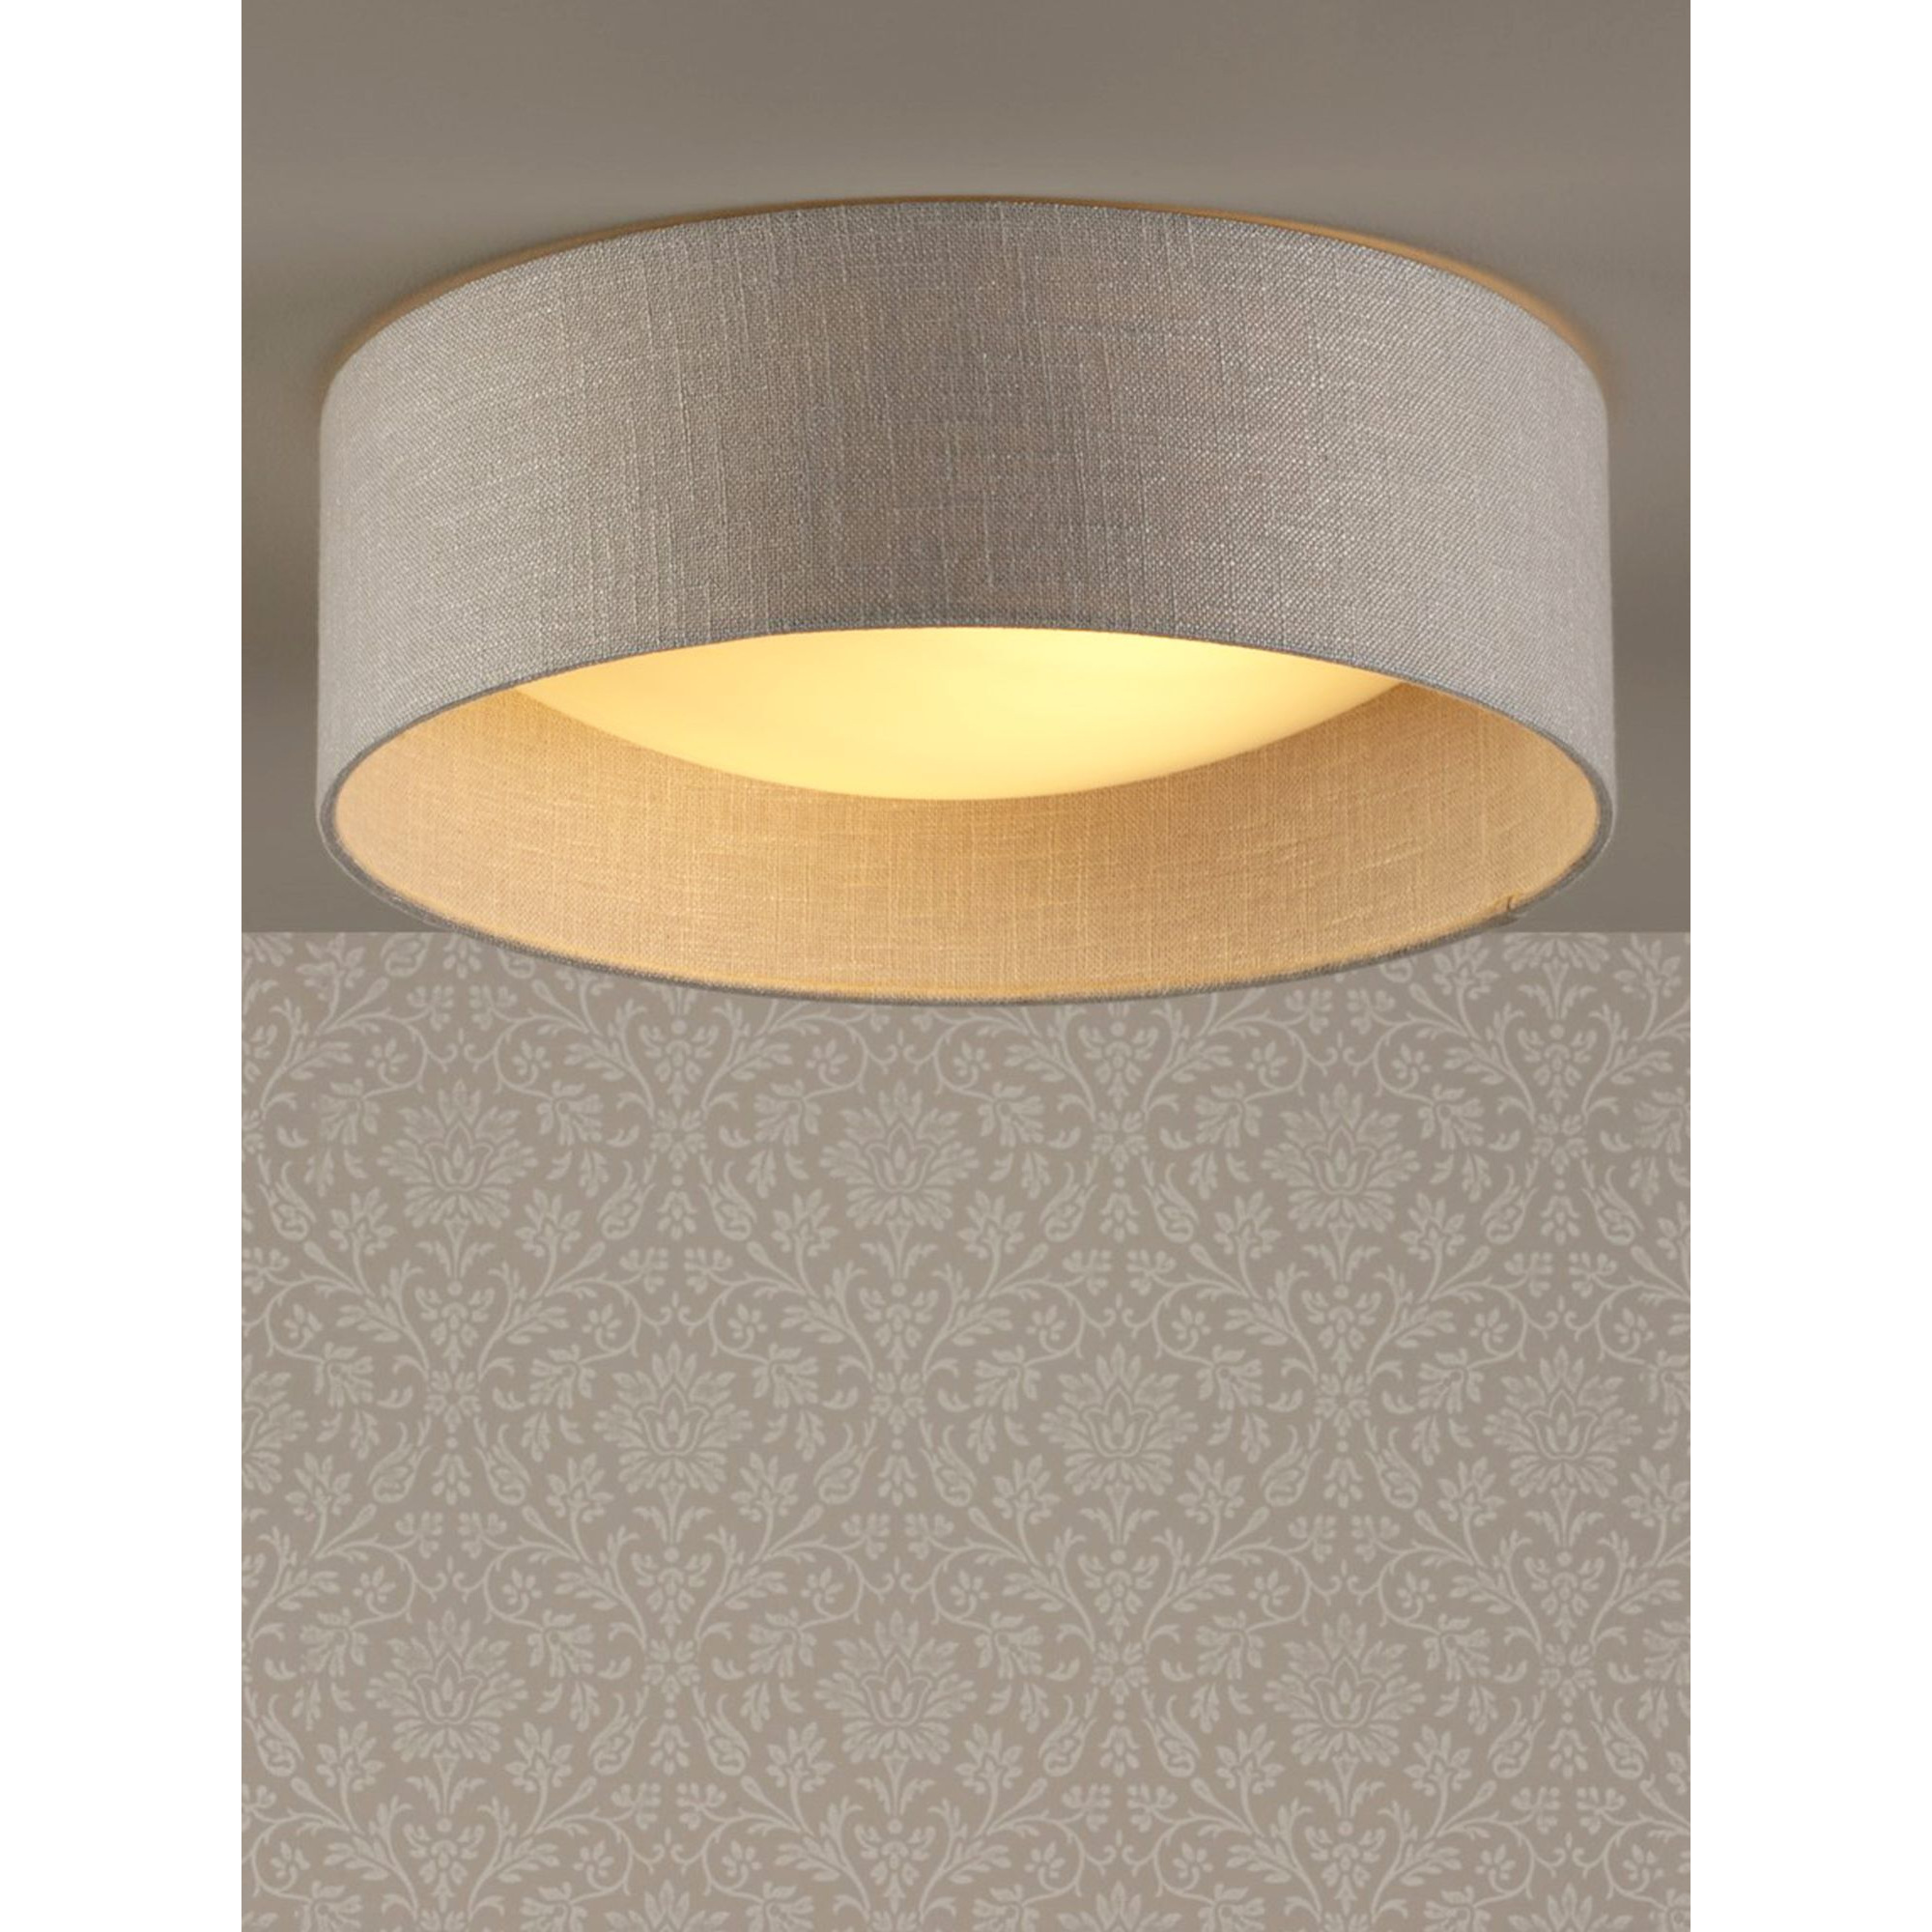 Laura Ashley Bacall Linen Concave Flush Ceiling Light, Woven Silver - image 1